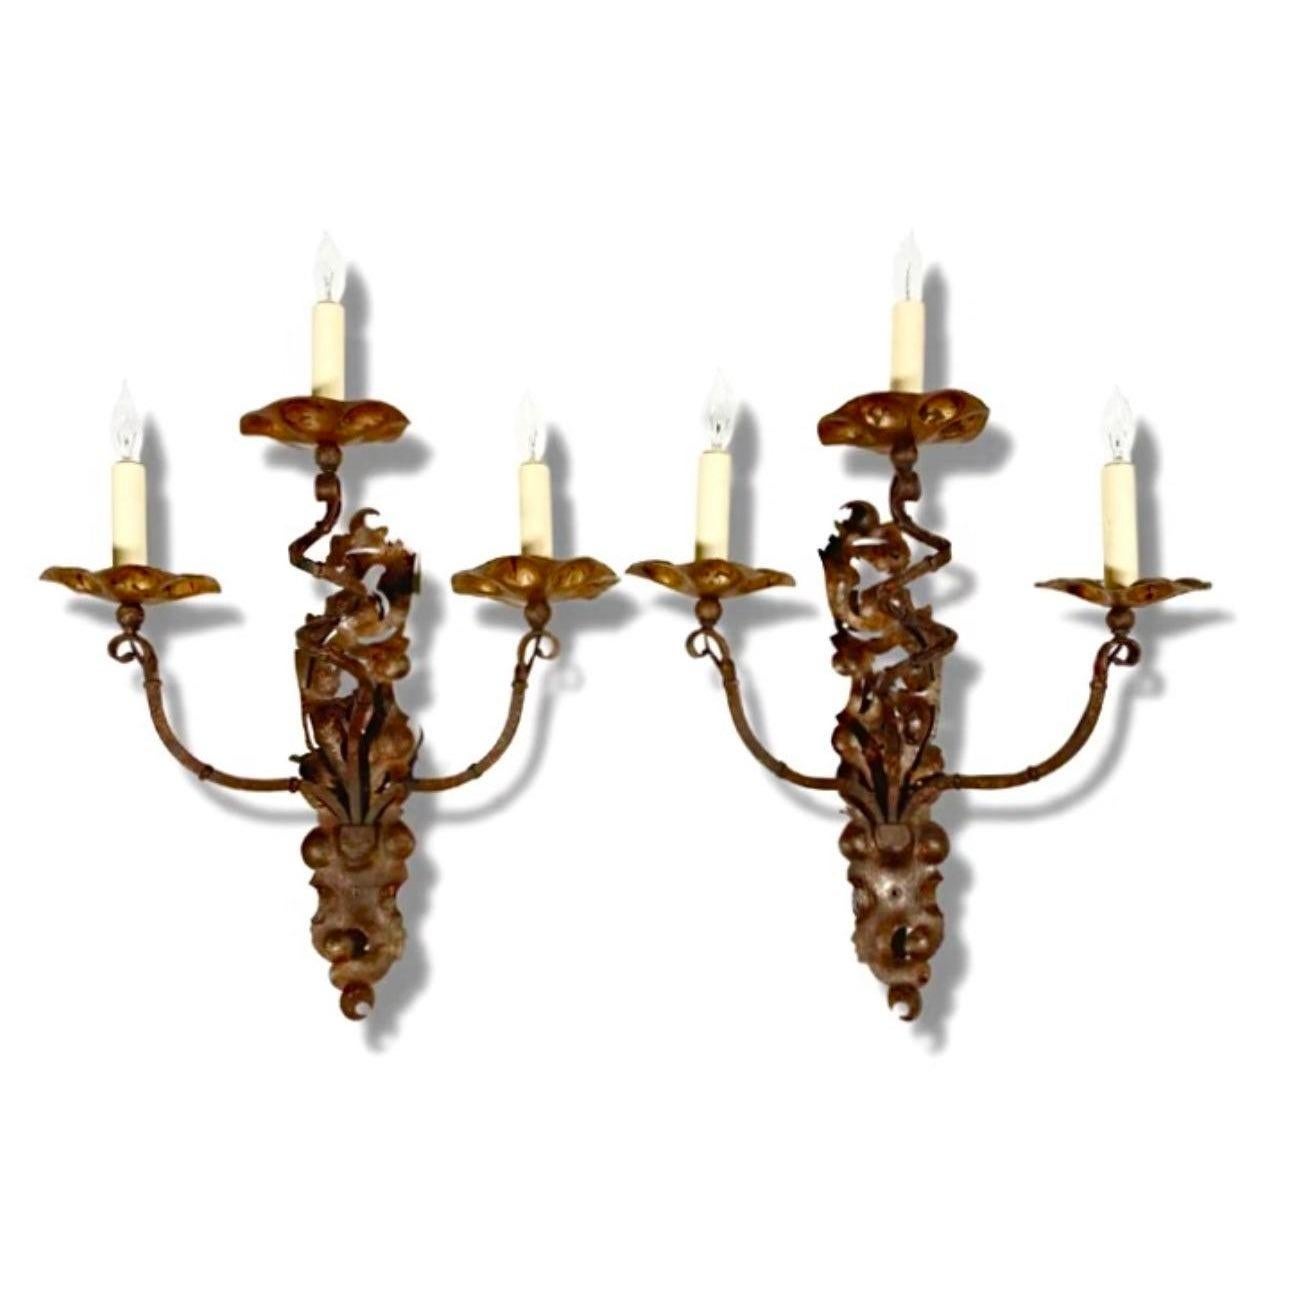 North American Vintage Early 20th Century Italian Iron Sconces - a Pair For Sale